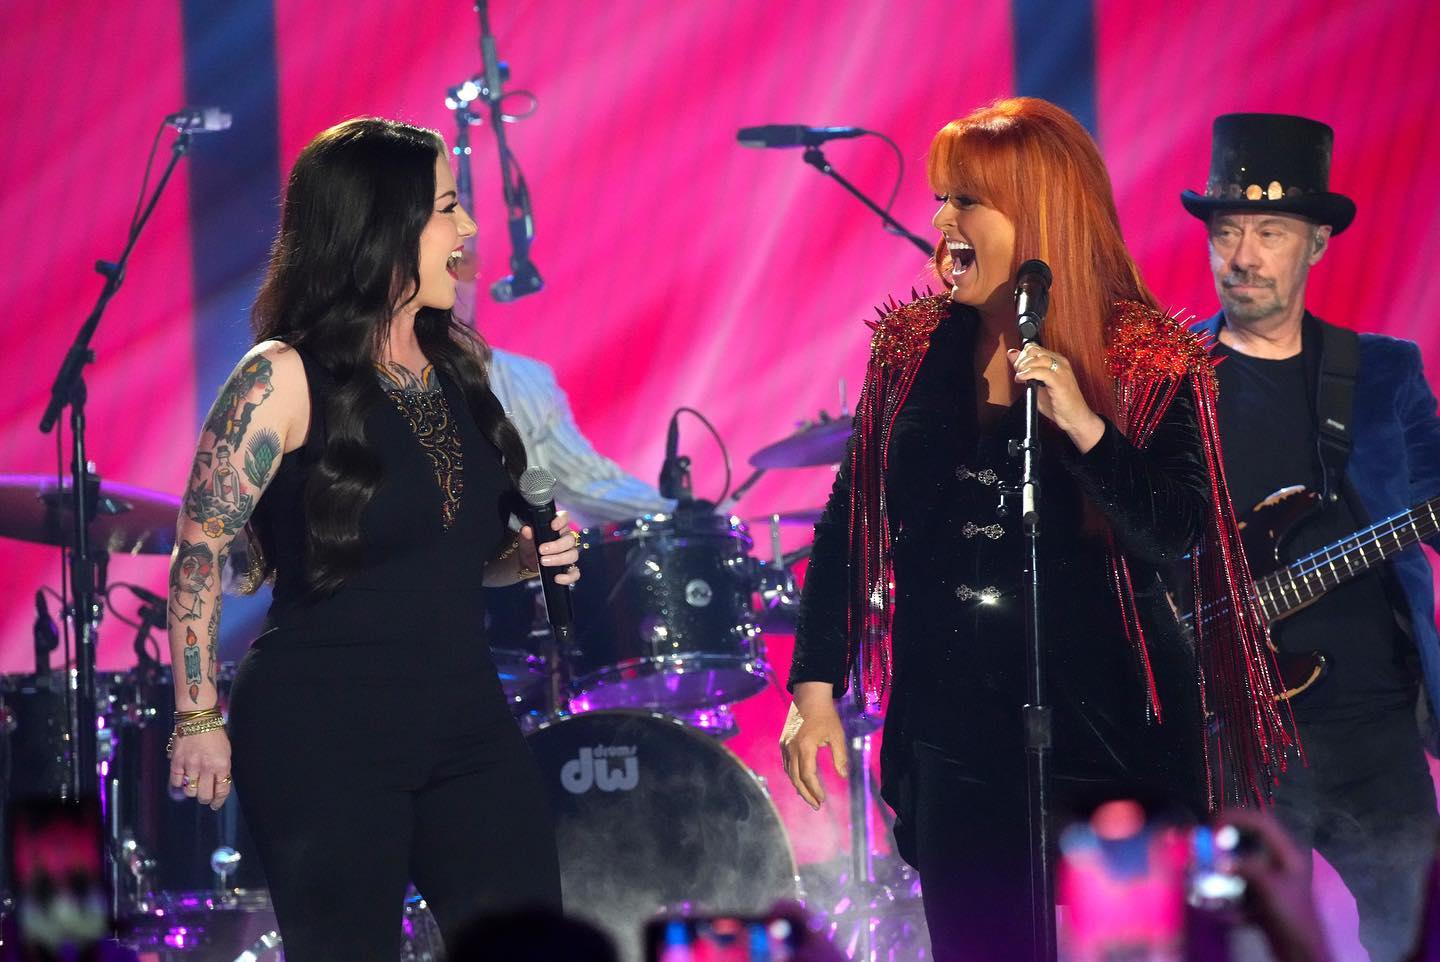 WATCH: “I Want to Know What Love Is” by Wynonna Judd and Ashley McBryde